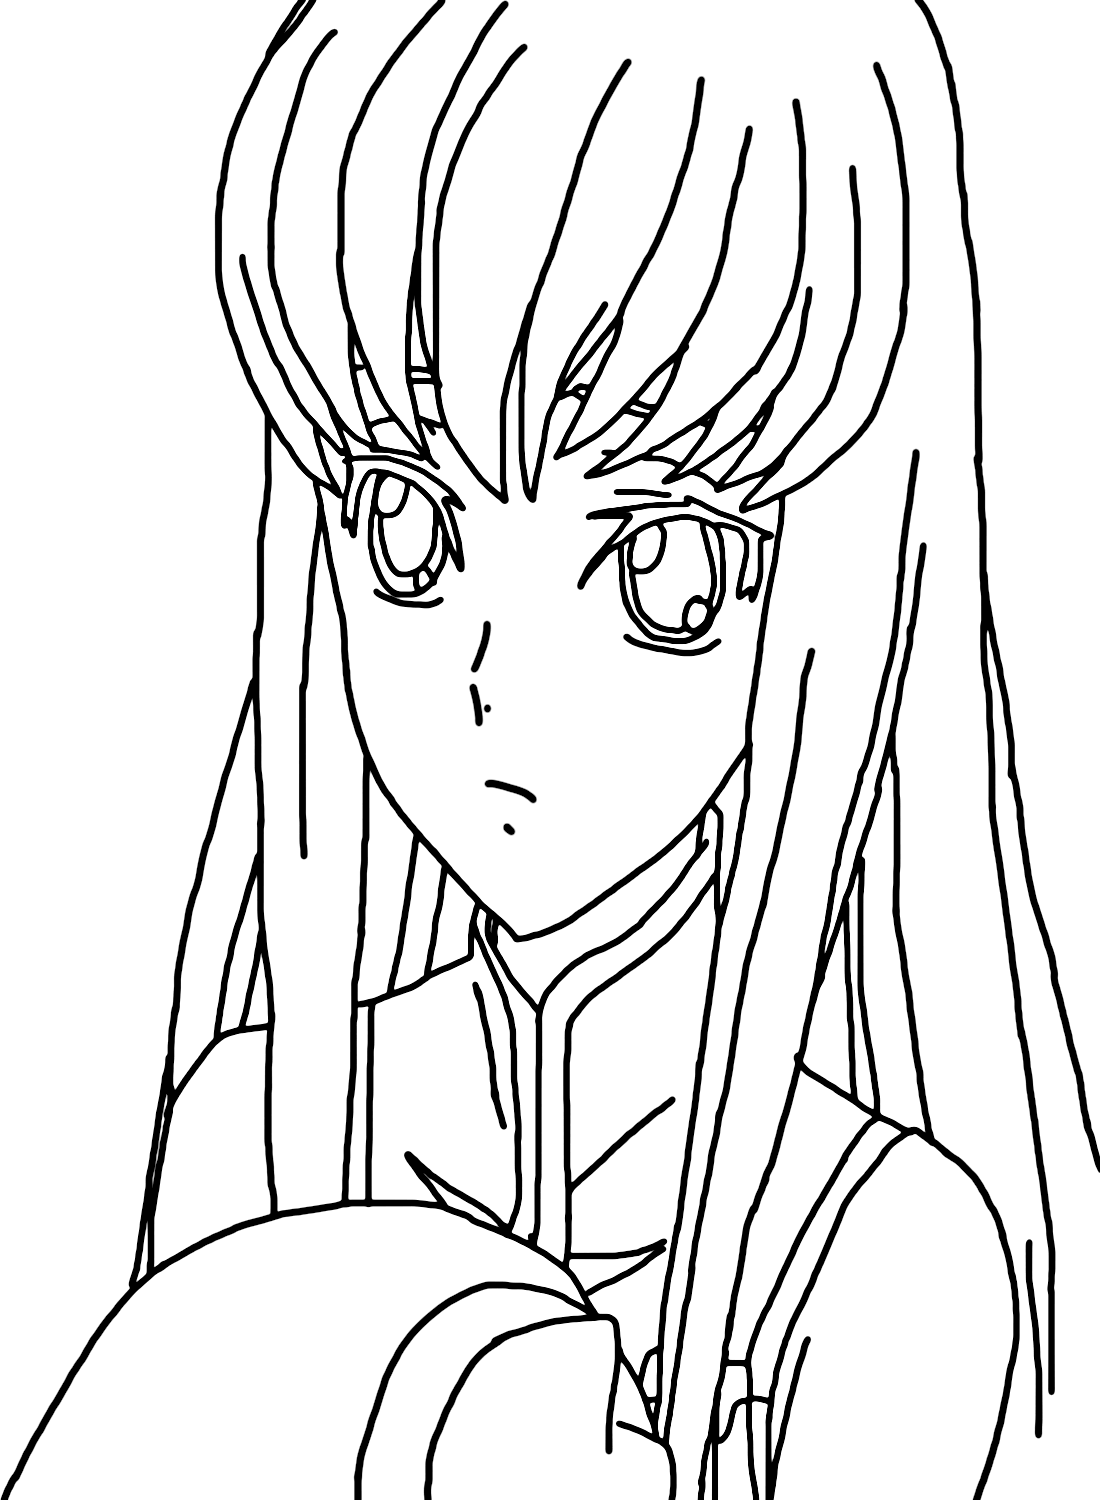 C.C. Code Geass Coloring Pages Printable from C.C. Code Geass